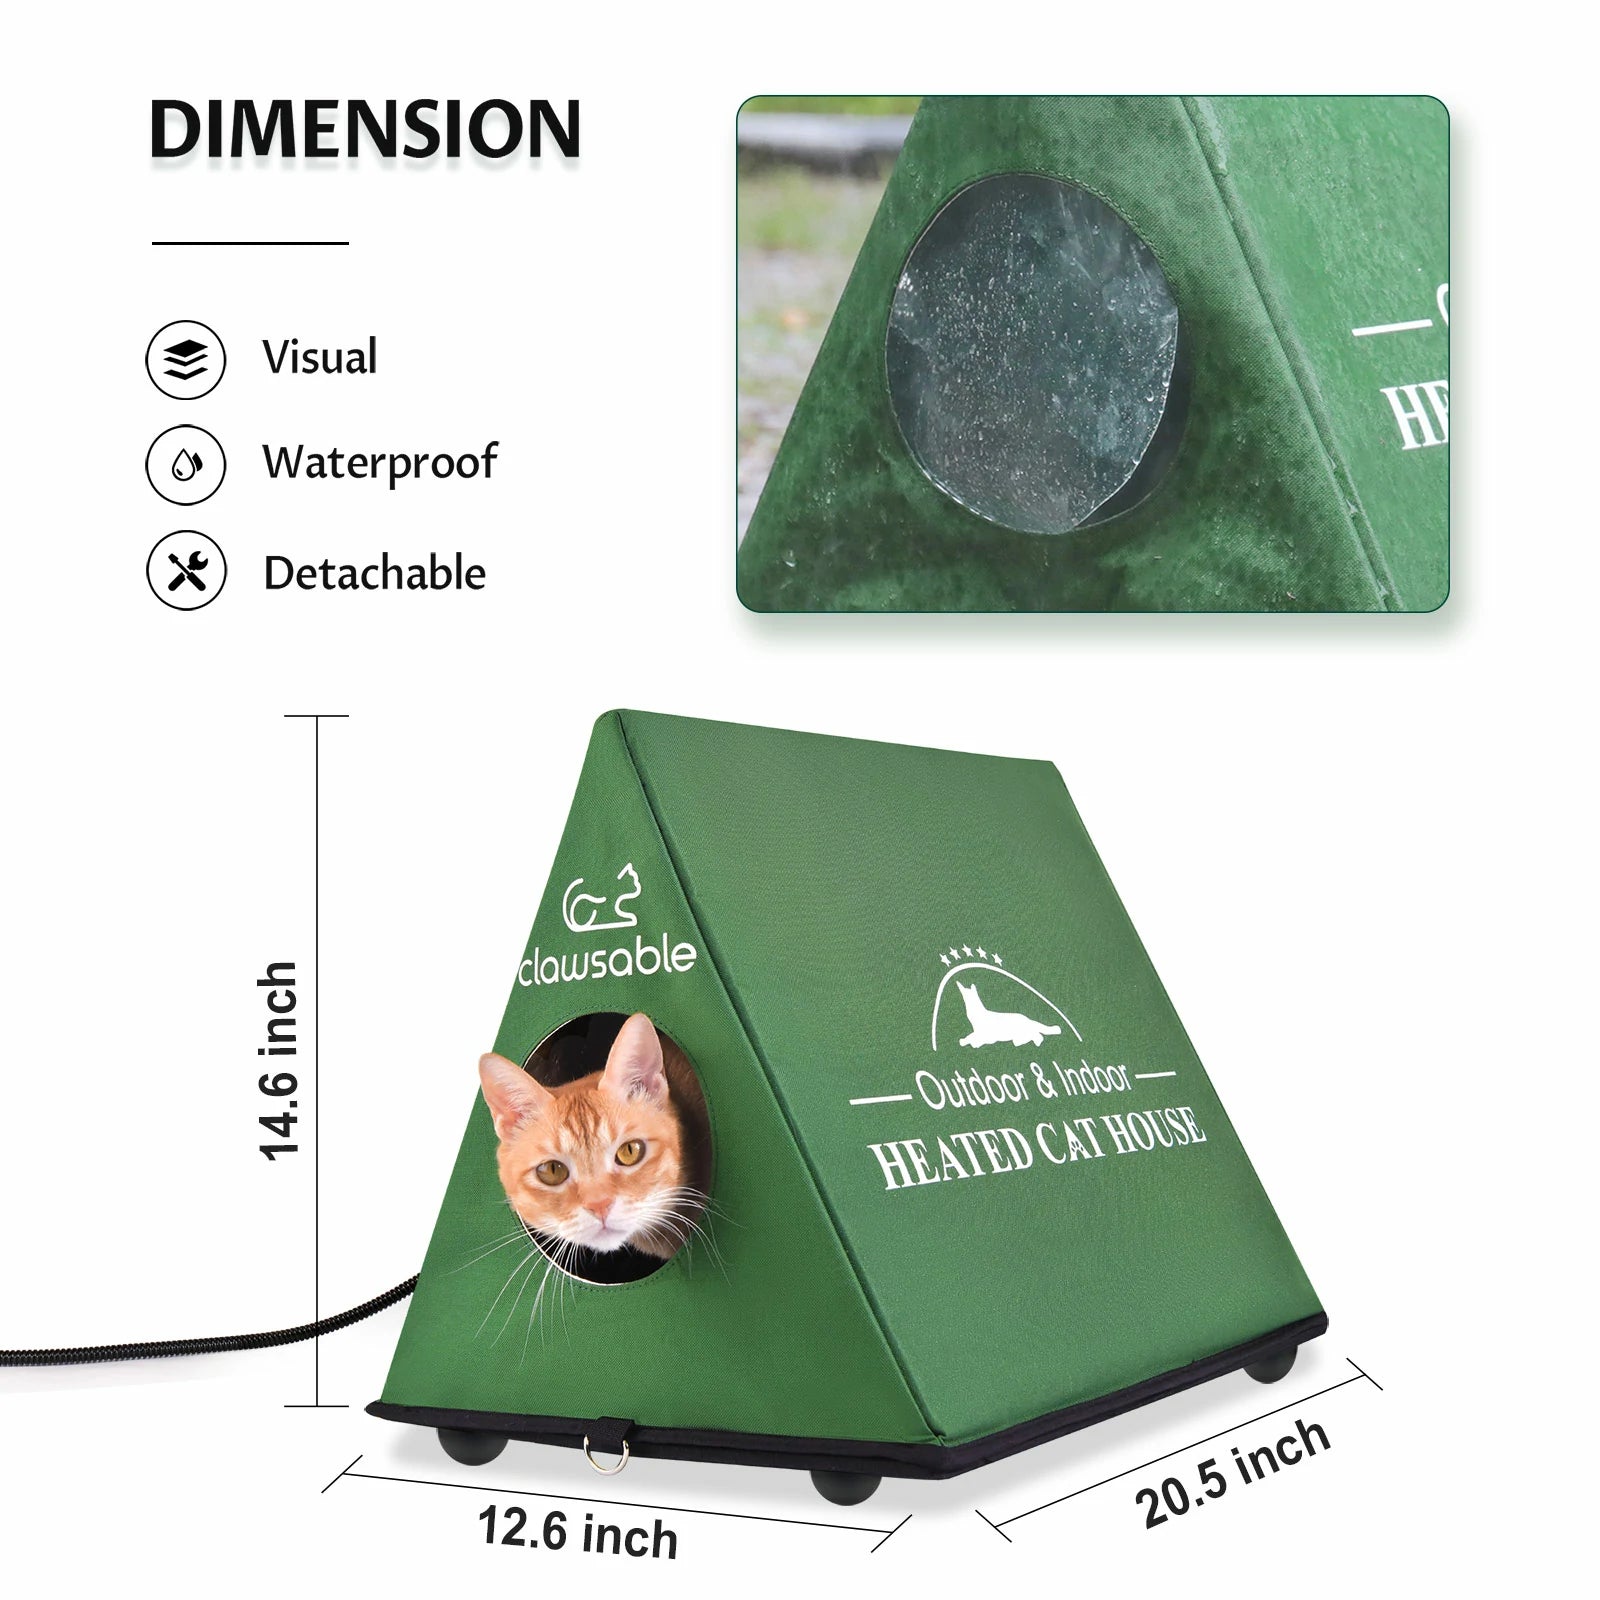 outdoor a shaped portable heated cat house dimension